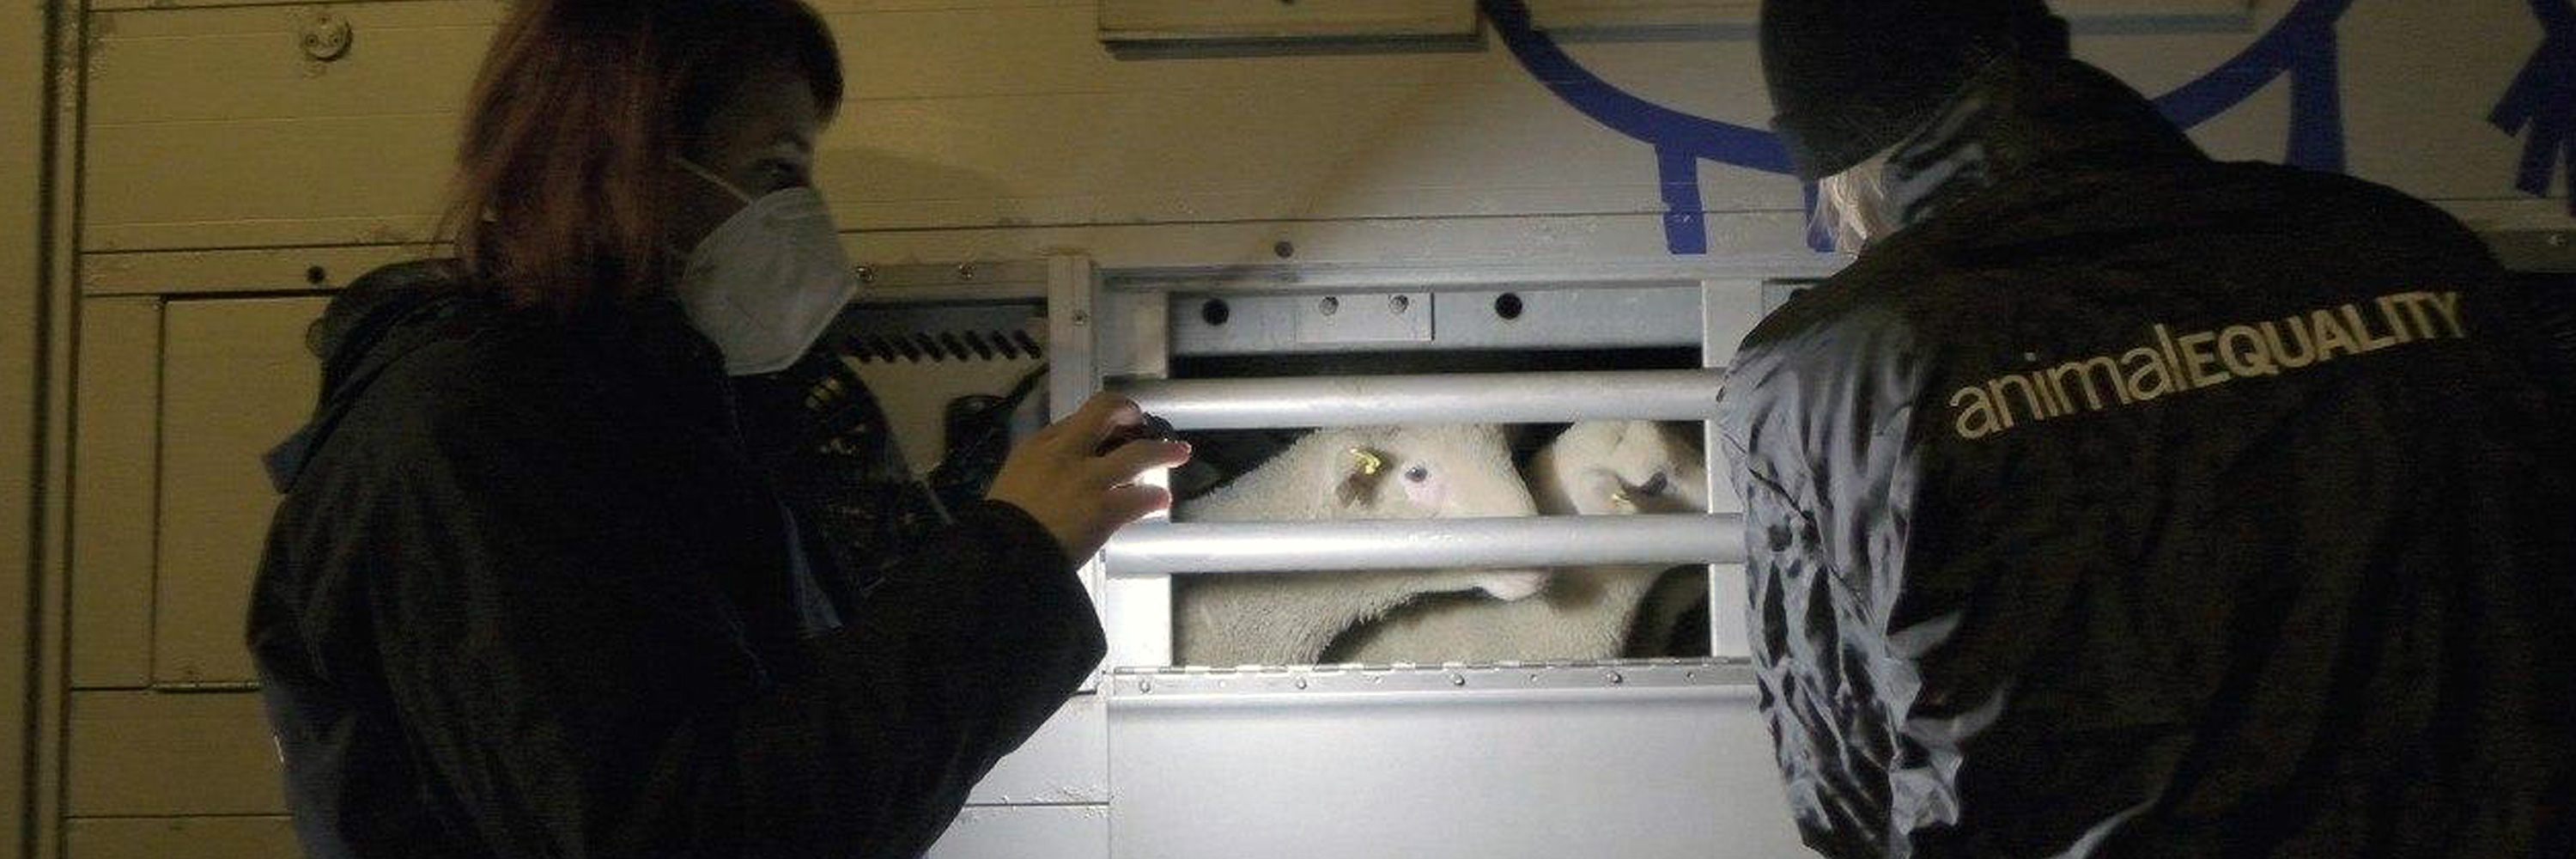 investigators document the live transport of lambs to Italy